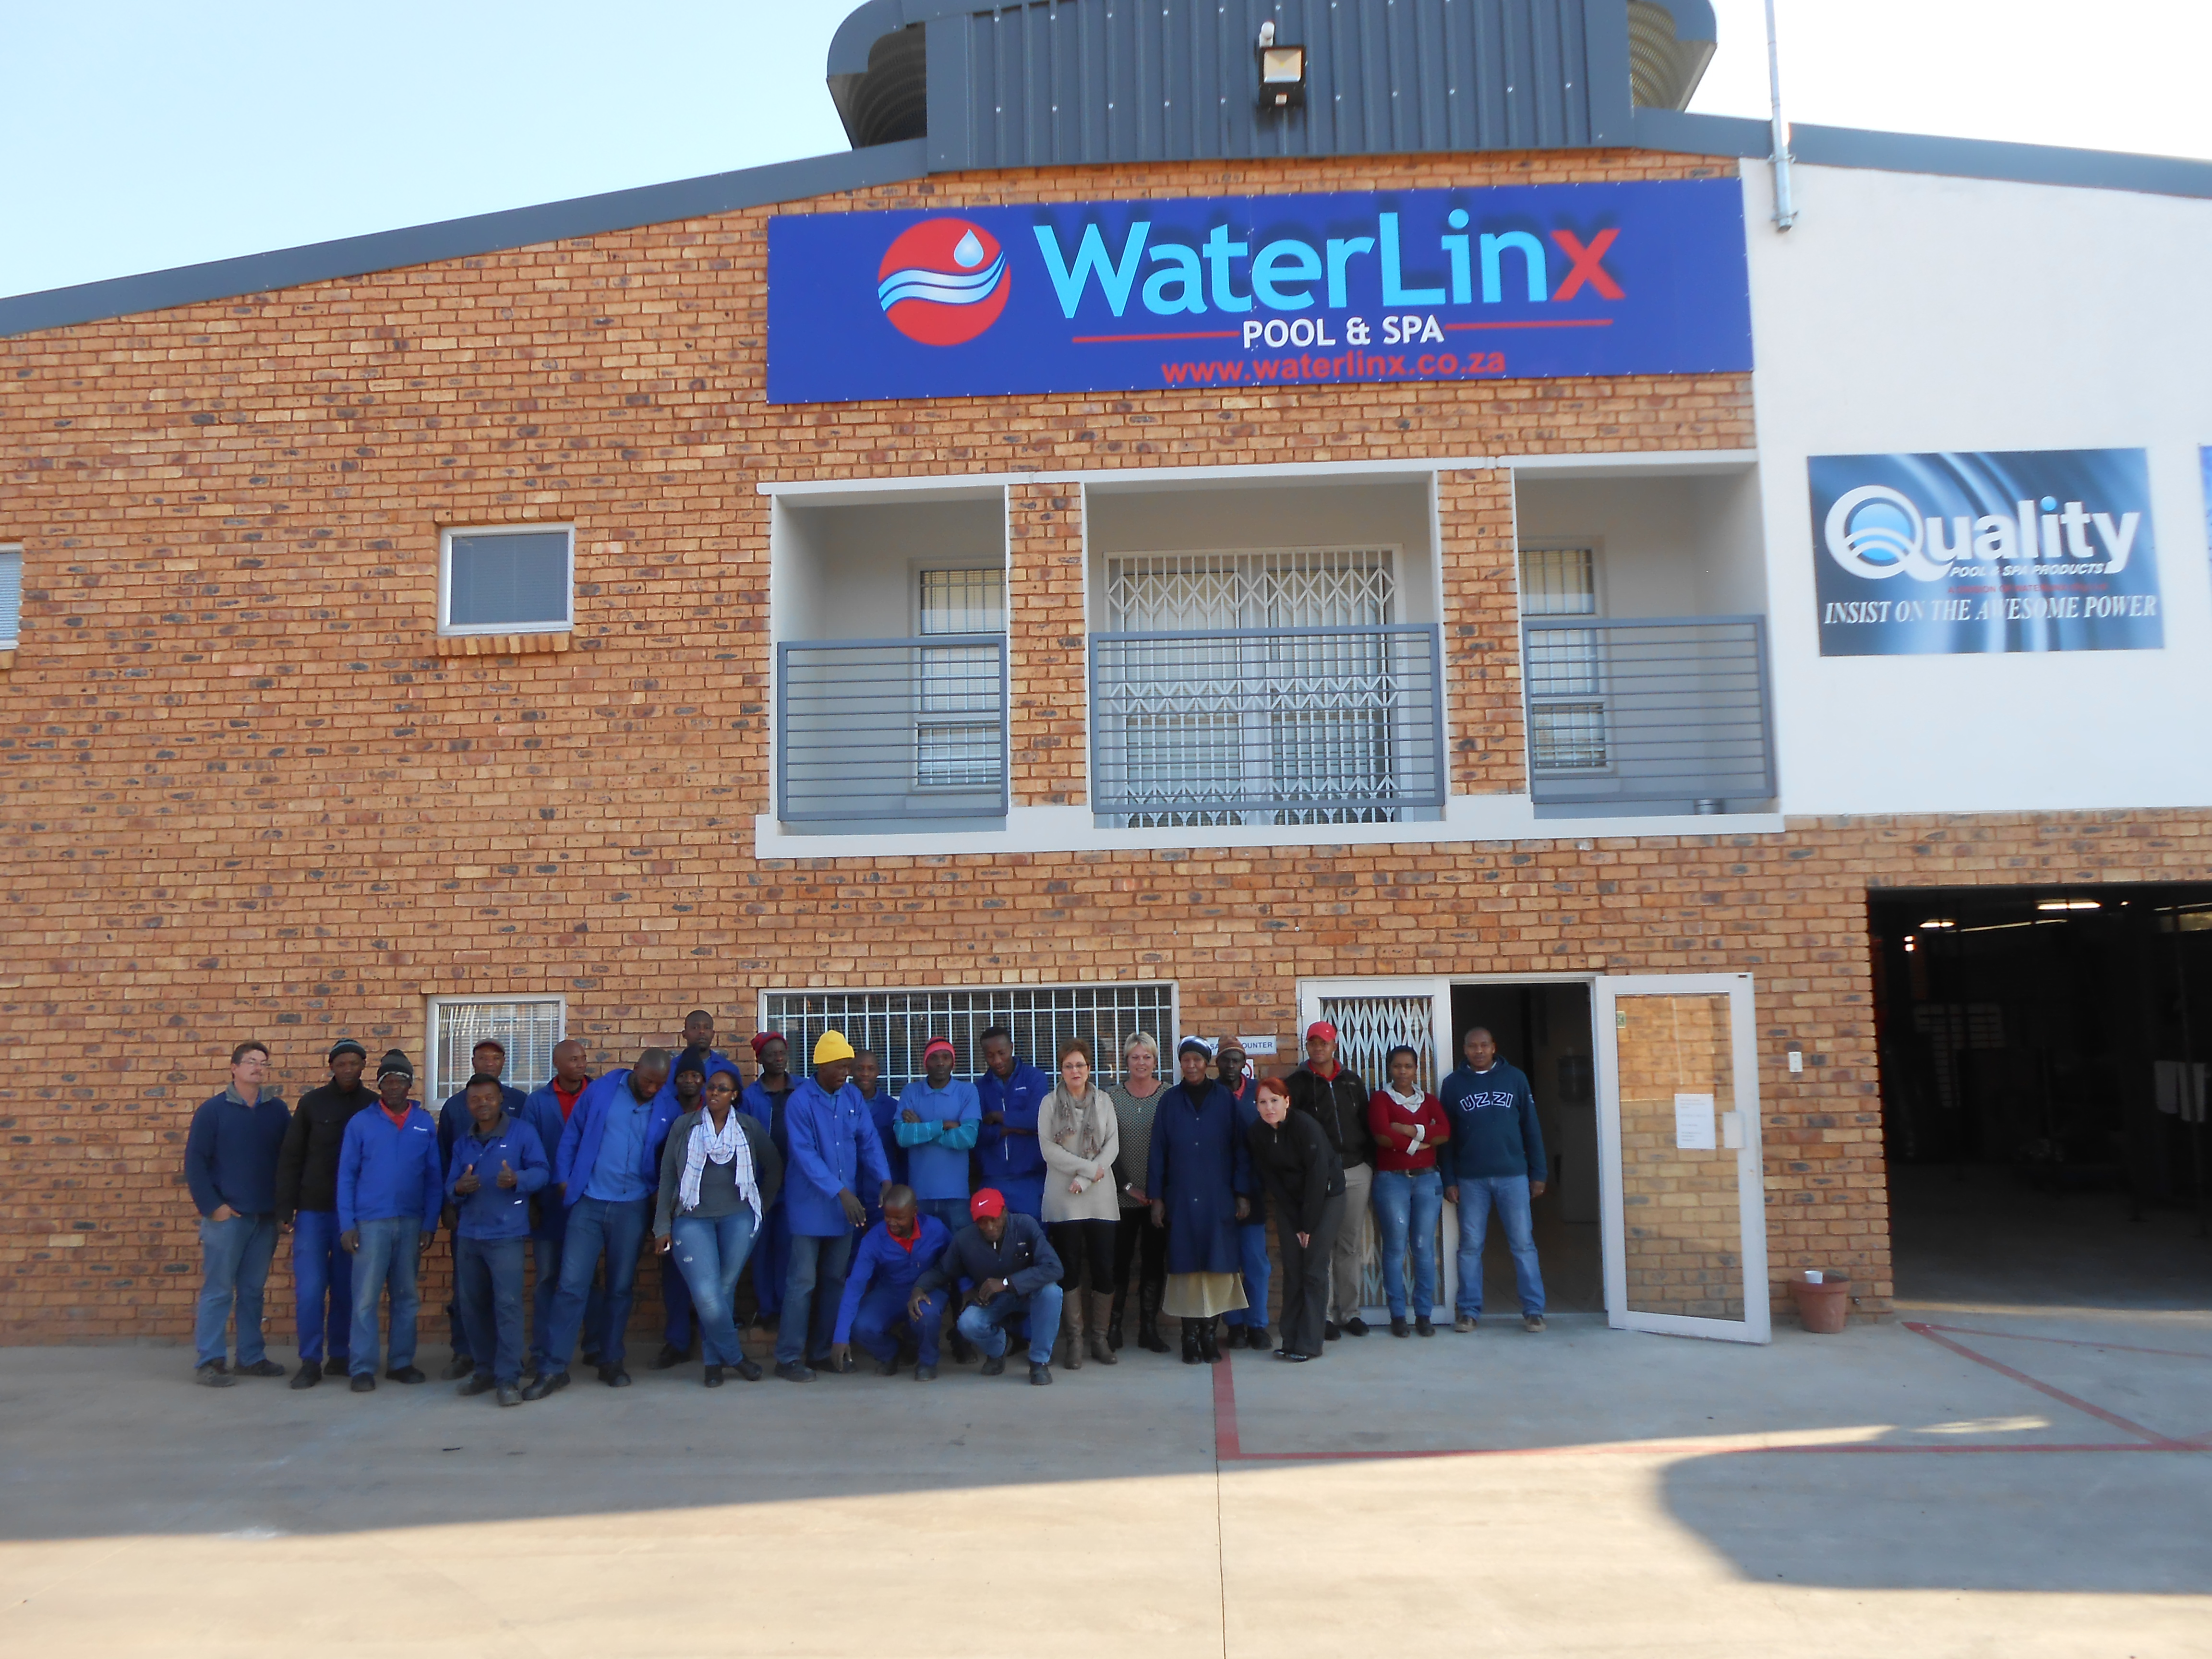 Fluidra acquires 72% of the leading South African pool company for 17 million euros